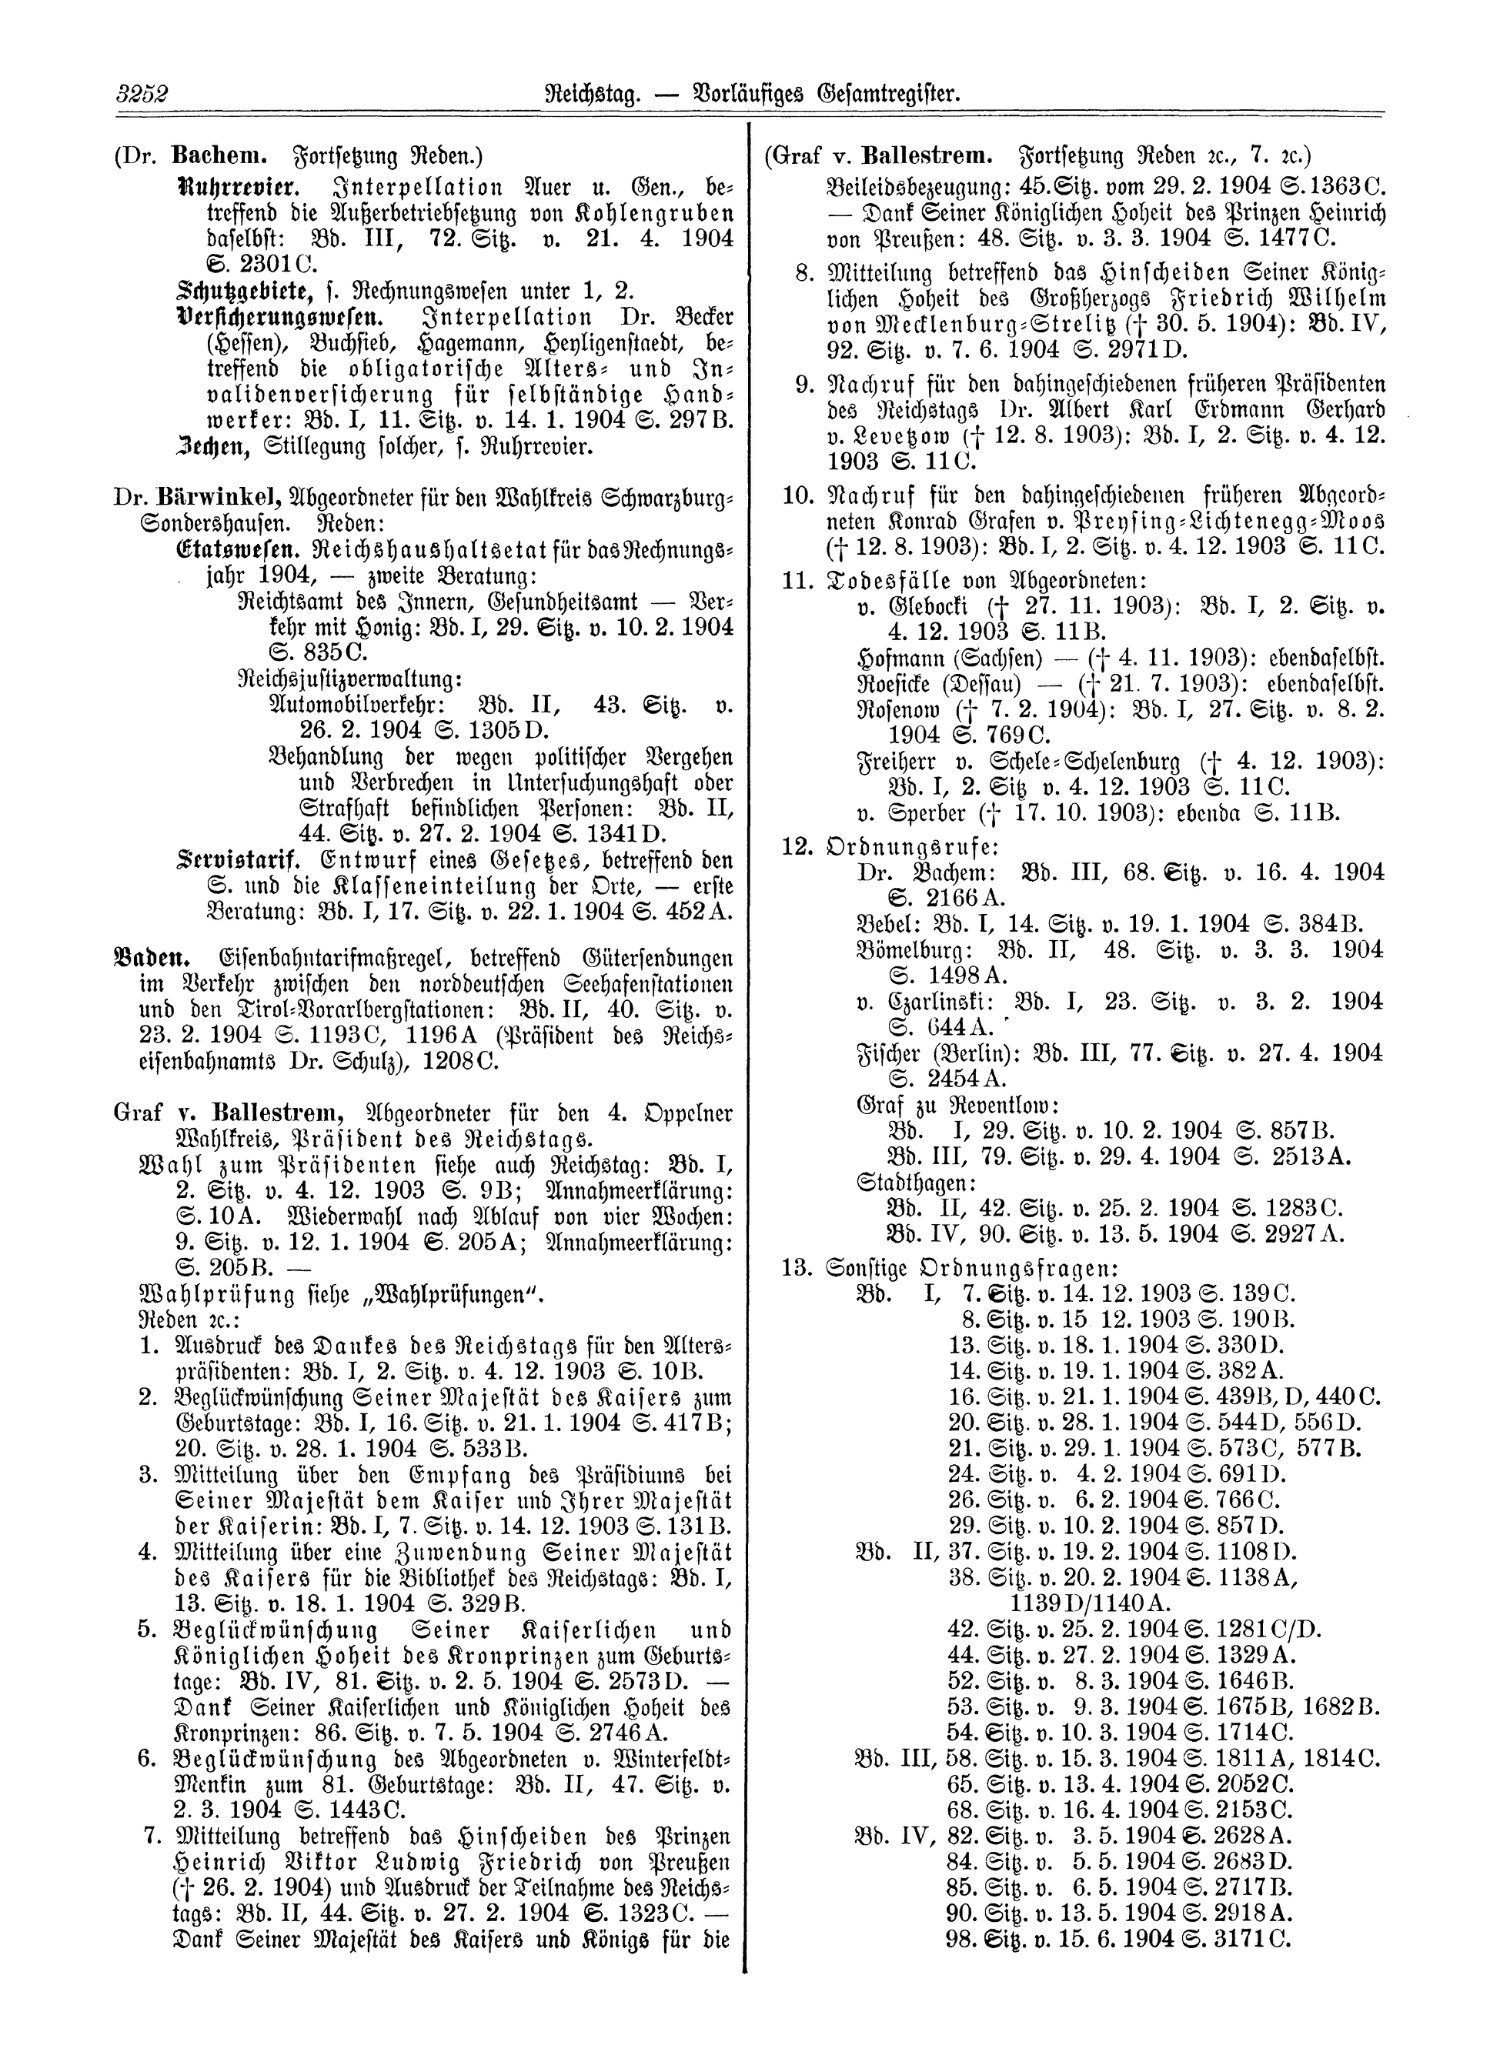 Scan of page 3252